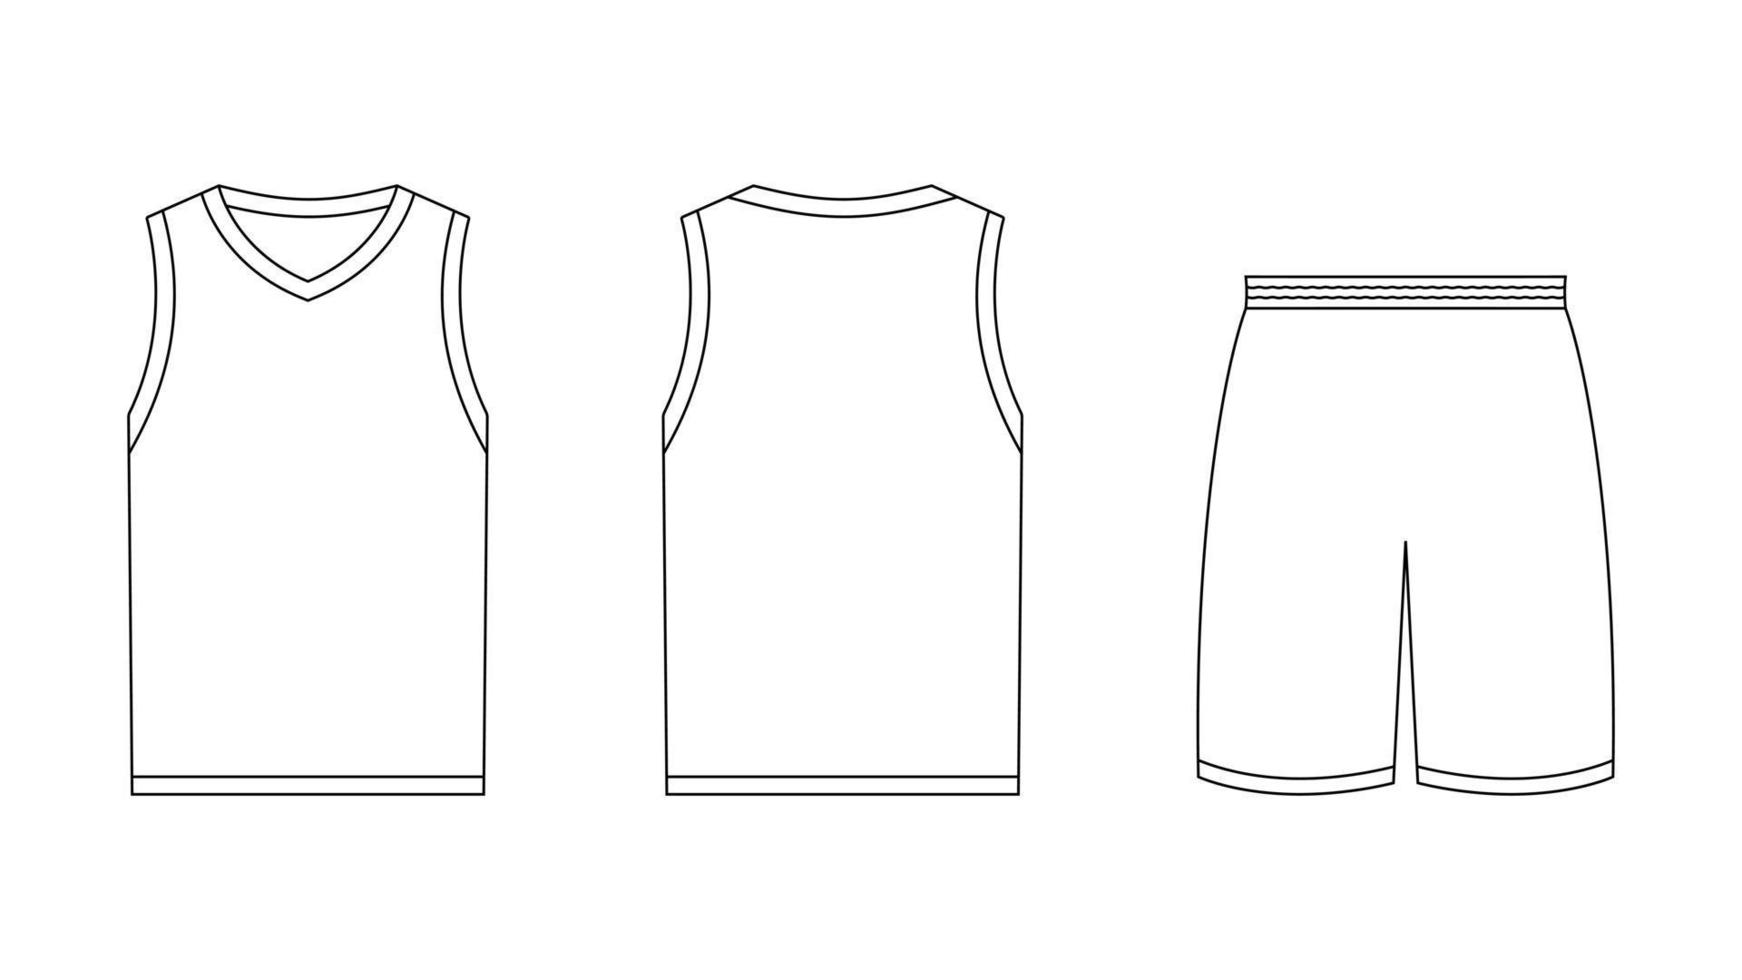 Sleeveless sports tshirt and shorts template. Front and back view unisex clothing pattern for outdoor activities and basketball practice. Casual stylish simple vector cotton textile